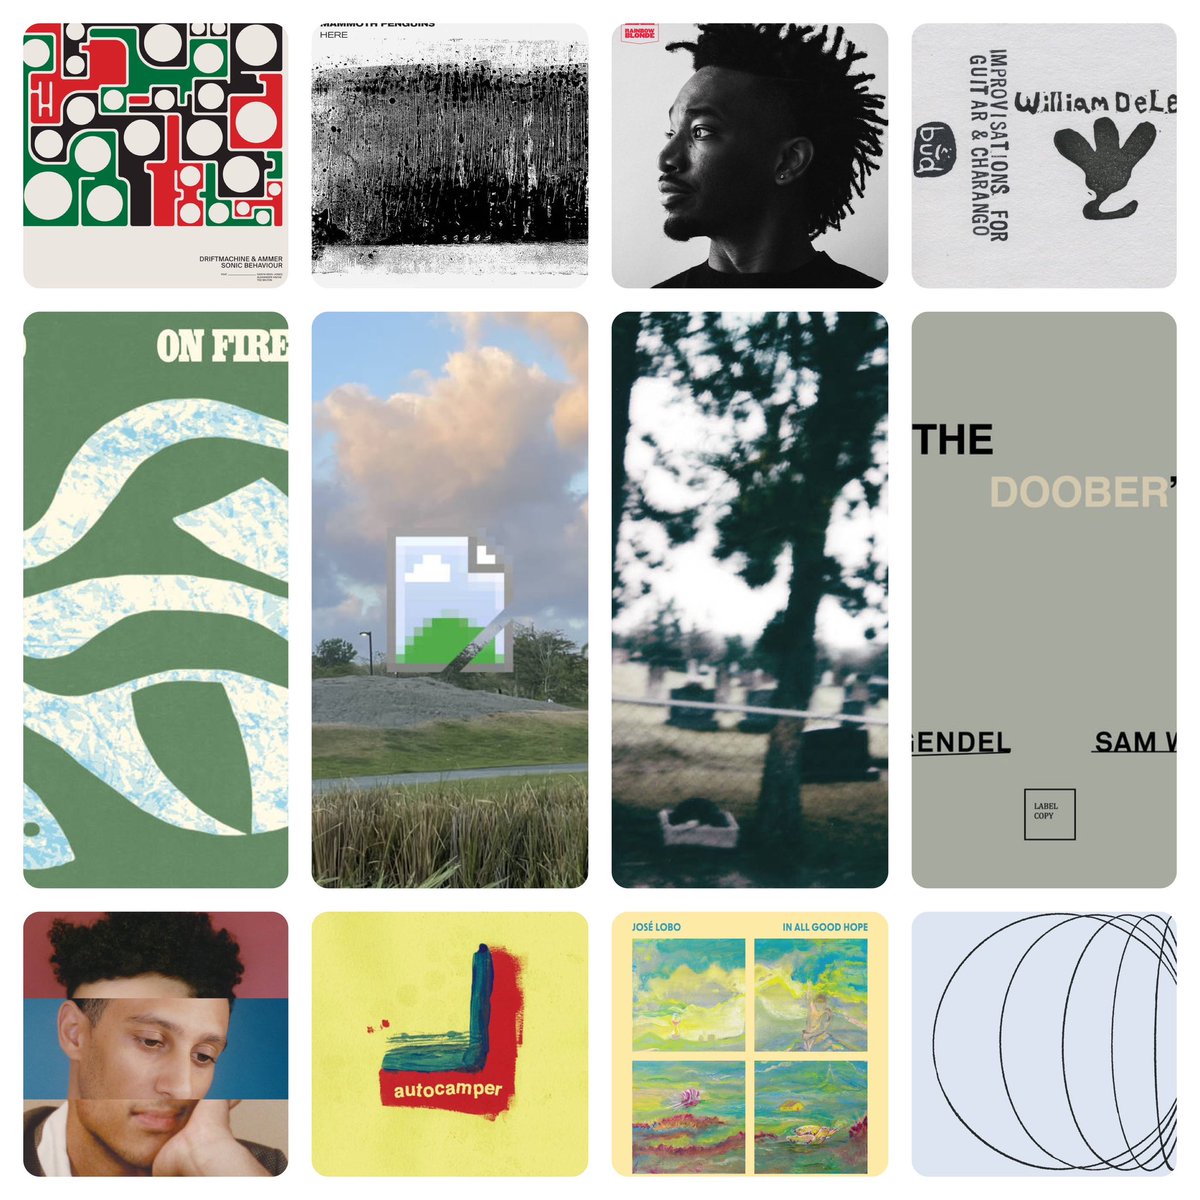 it's NEW MUSIC FRIDAY! here is our guide to ALL the NEW MUSIC we are listening to today⬇️ smallalbums.com/new-music-frid…